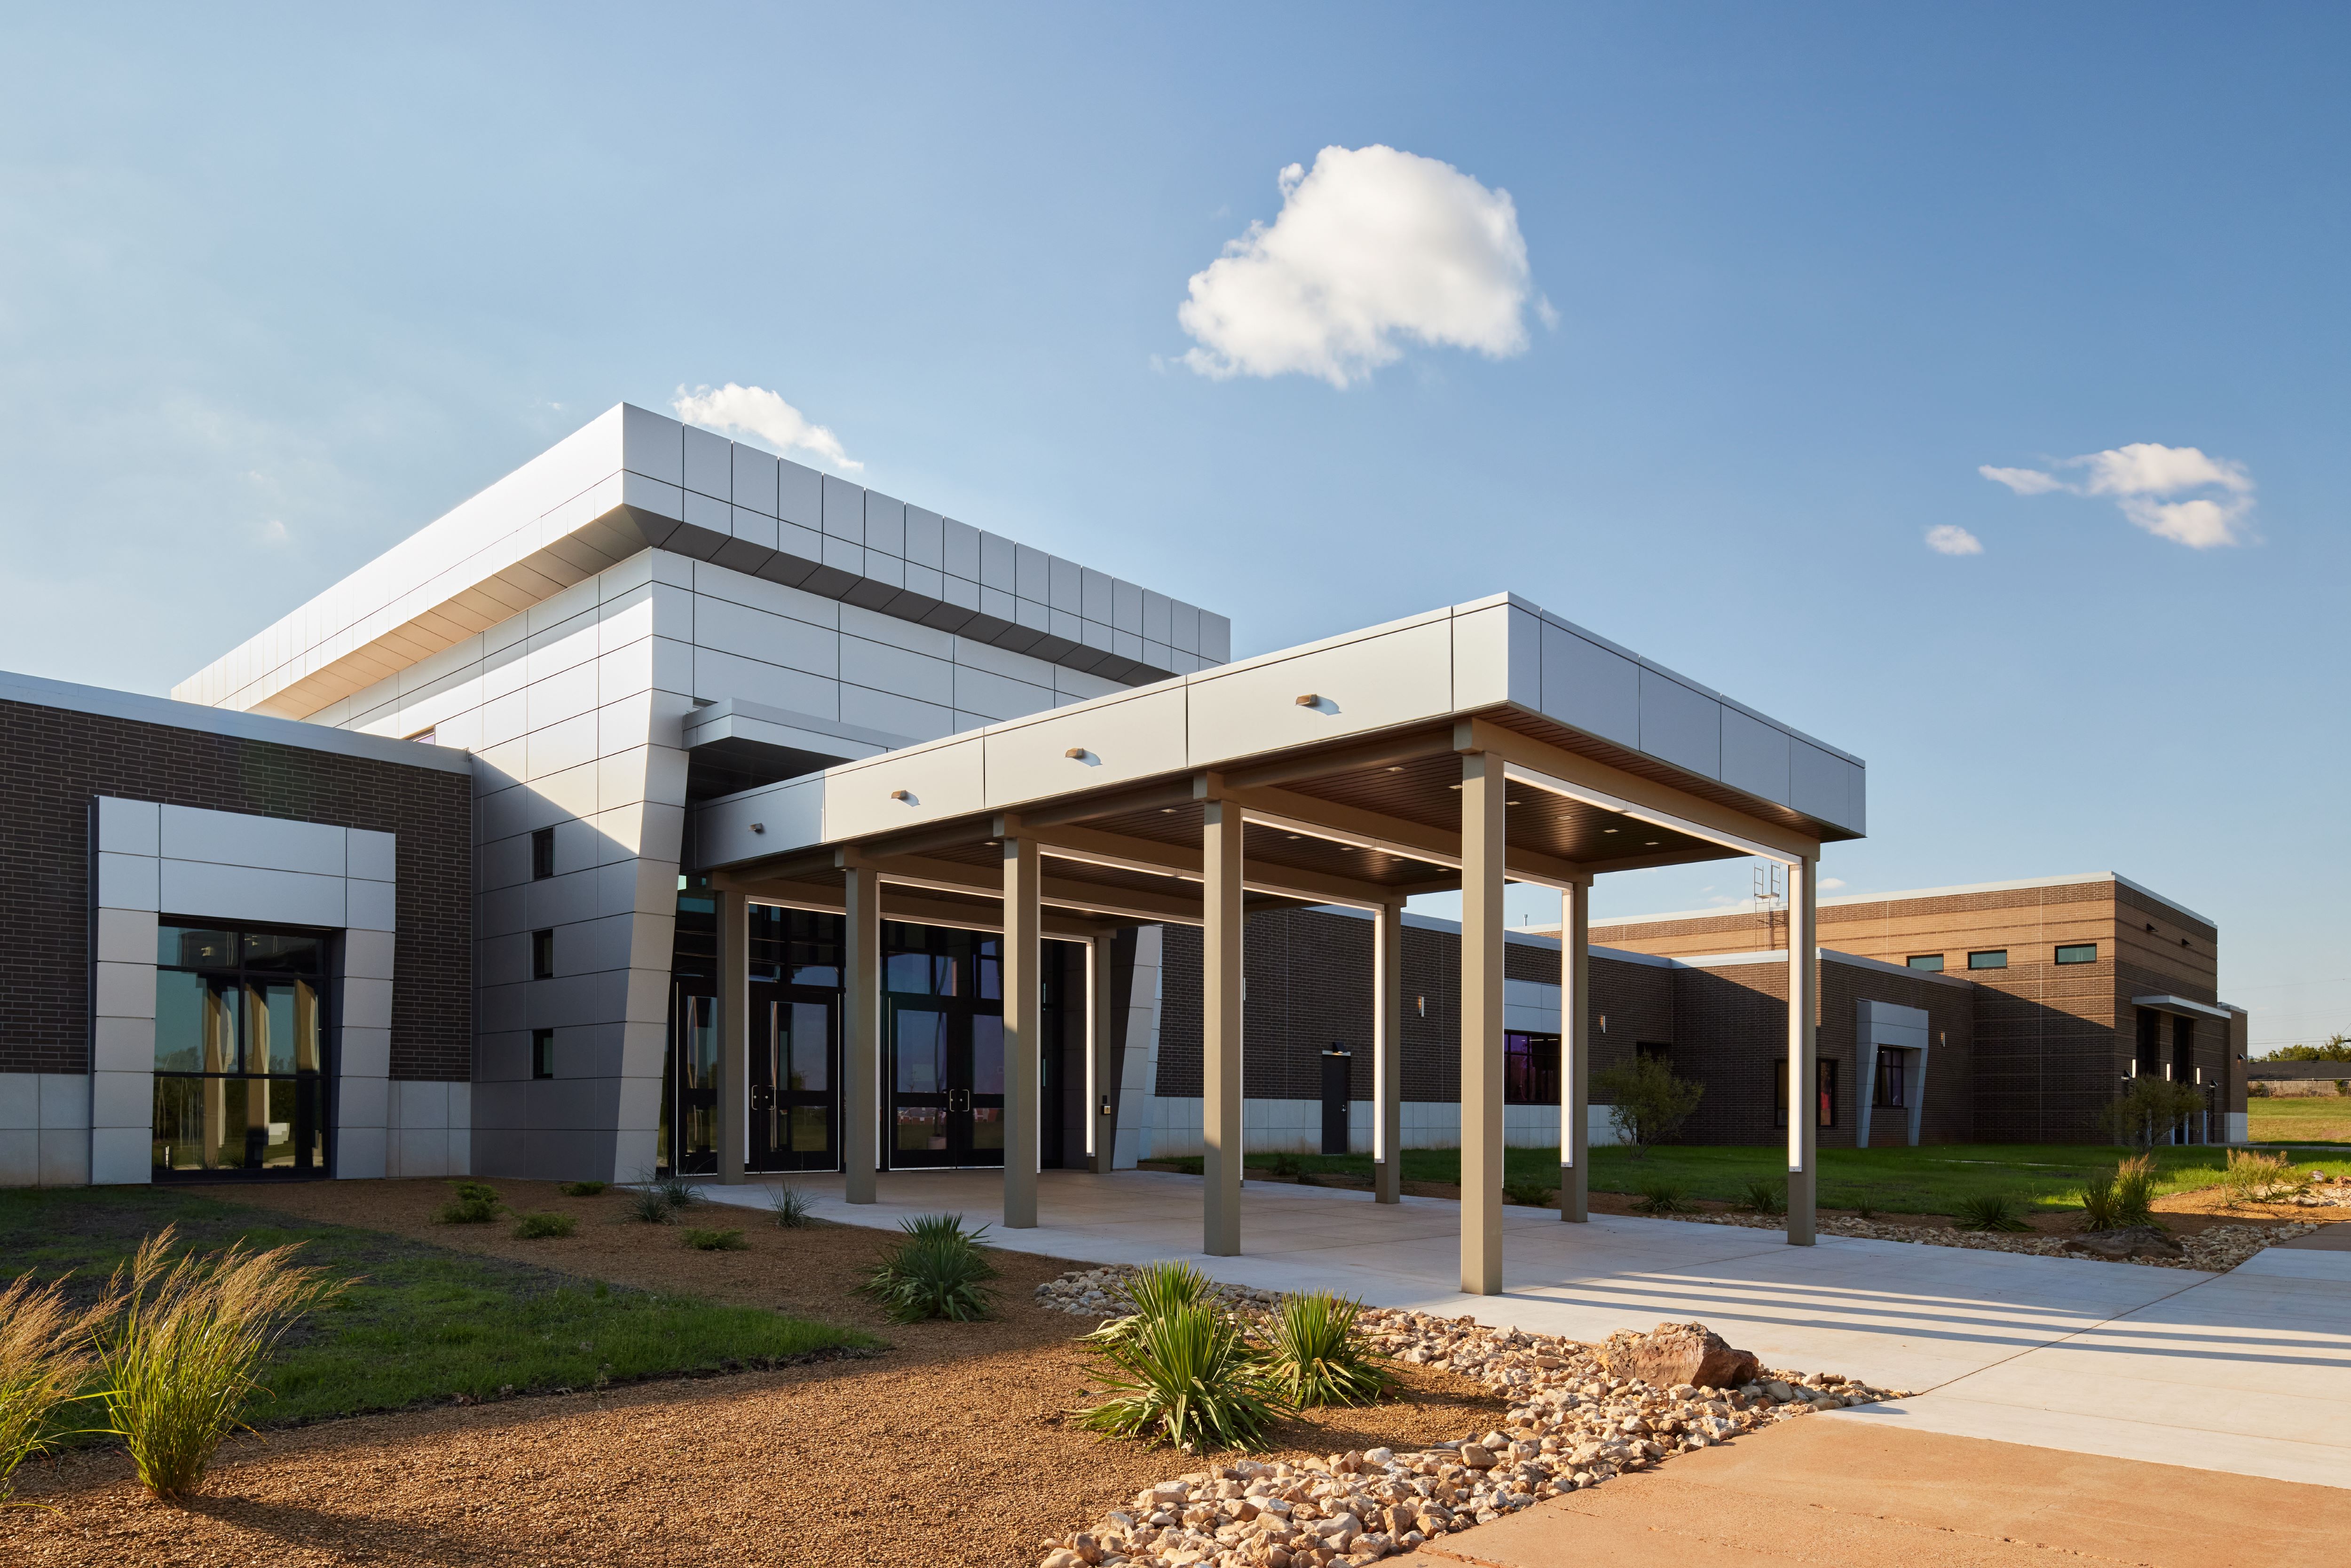 The front entrance of Metro Technology Centers- Public Safety Academy was designed by Renaissance Architecture.